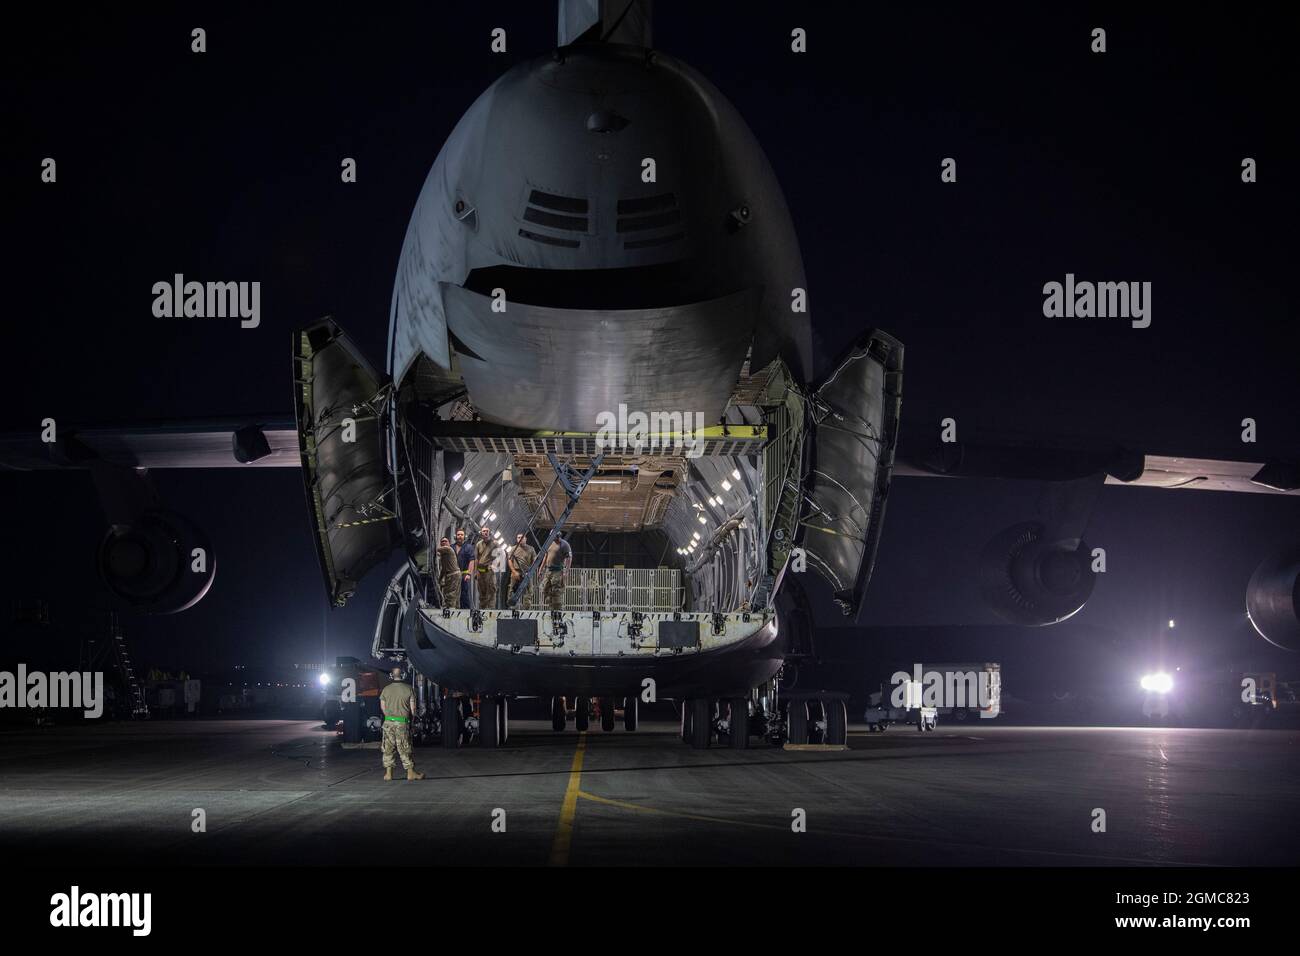 Airmen with the 730th Air Mobility Squadron open the loading bay of a C-5M Super Galaxy at Yokota Air Base, Japan, Sept. 14, 2021. The C-5 is the largest strategic transportation aircraft whose primary mission is to transport cargo and personnel for the Department of Defense. (U.S. Air Force photo by Senior Airman Brieana E. Bolfing) Stock Photo